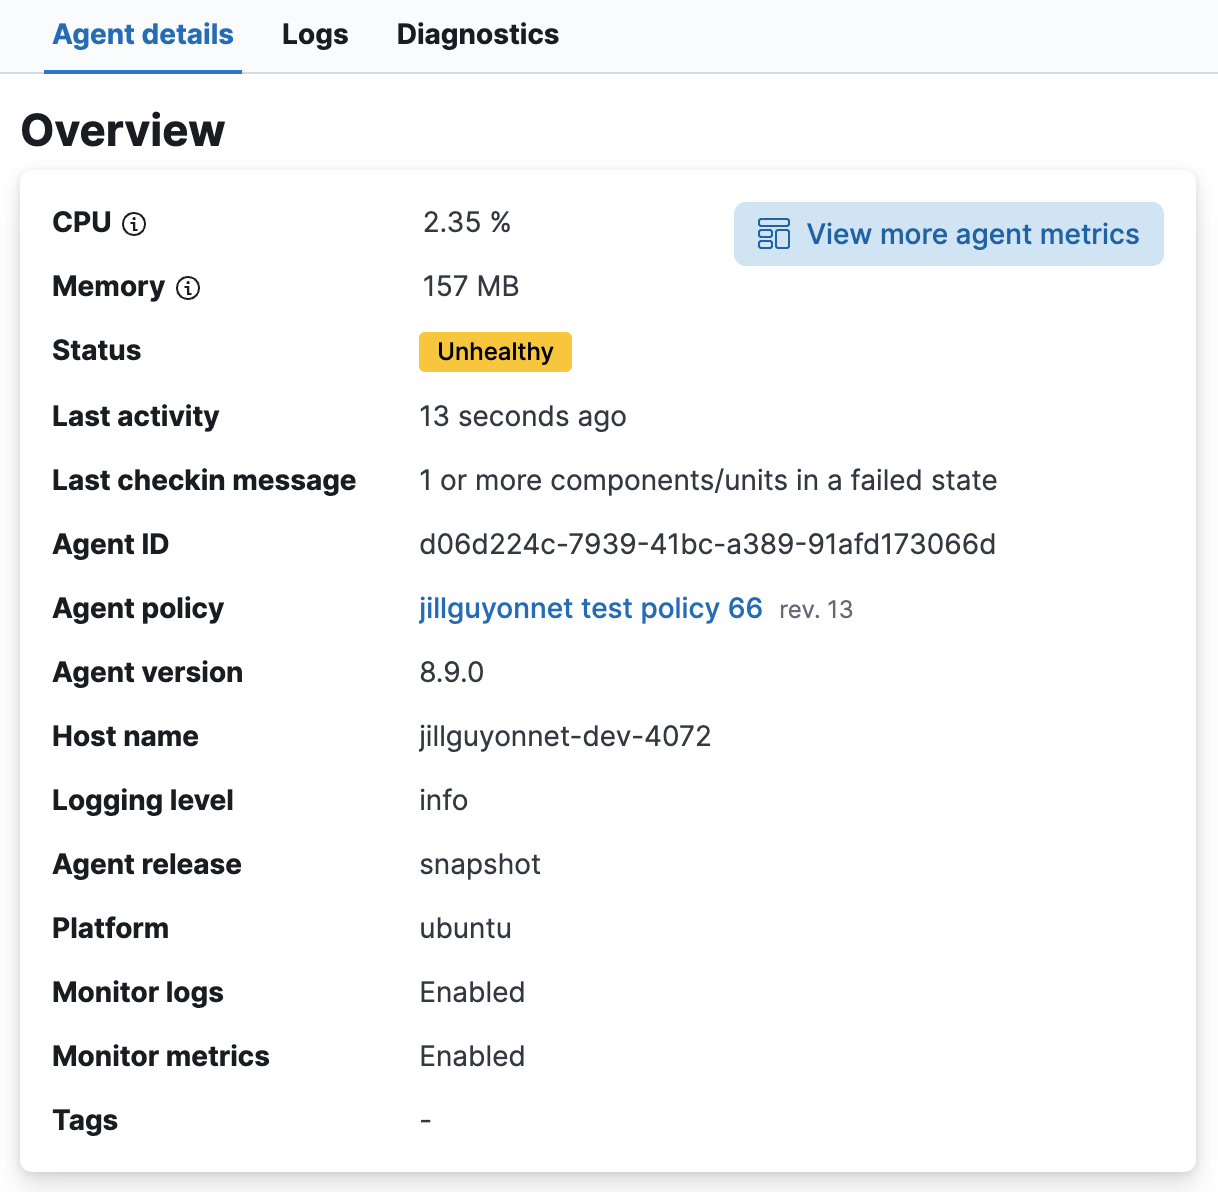 Agent details overview pane with various metrics